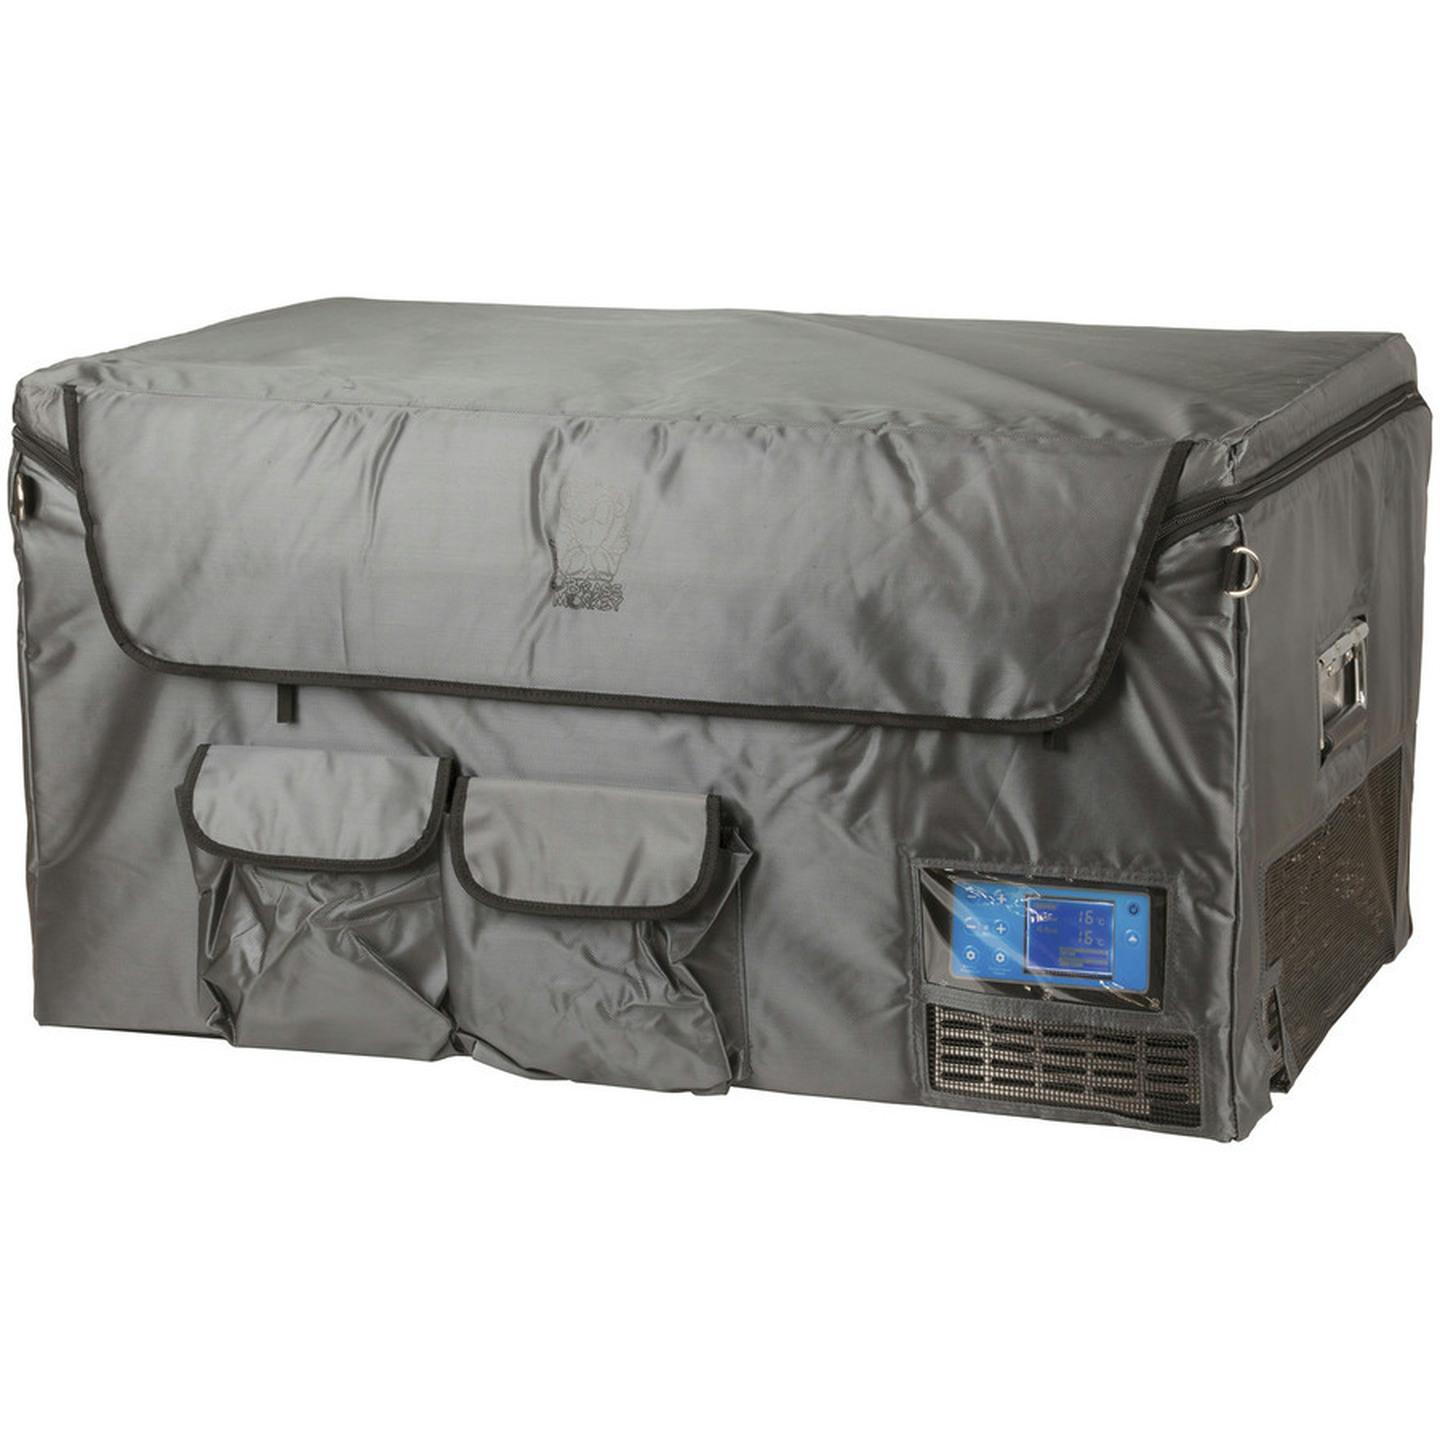 Grey Insulated Cover for 100L Brass Monkey Portable Fridge/Freezer